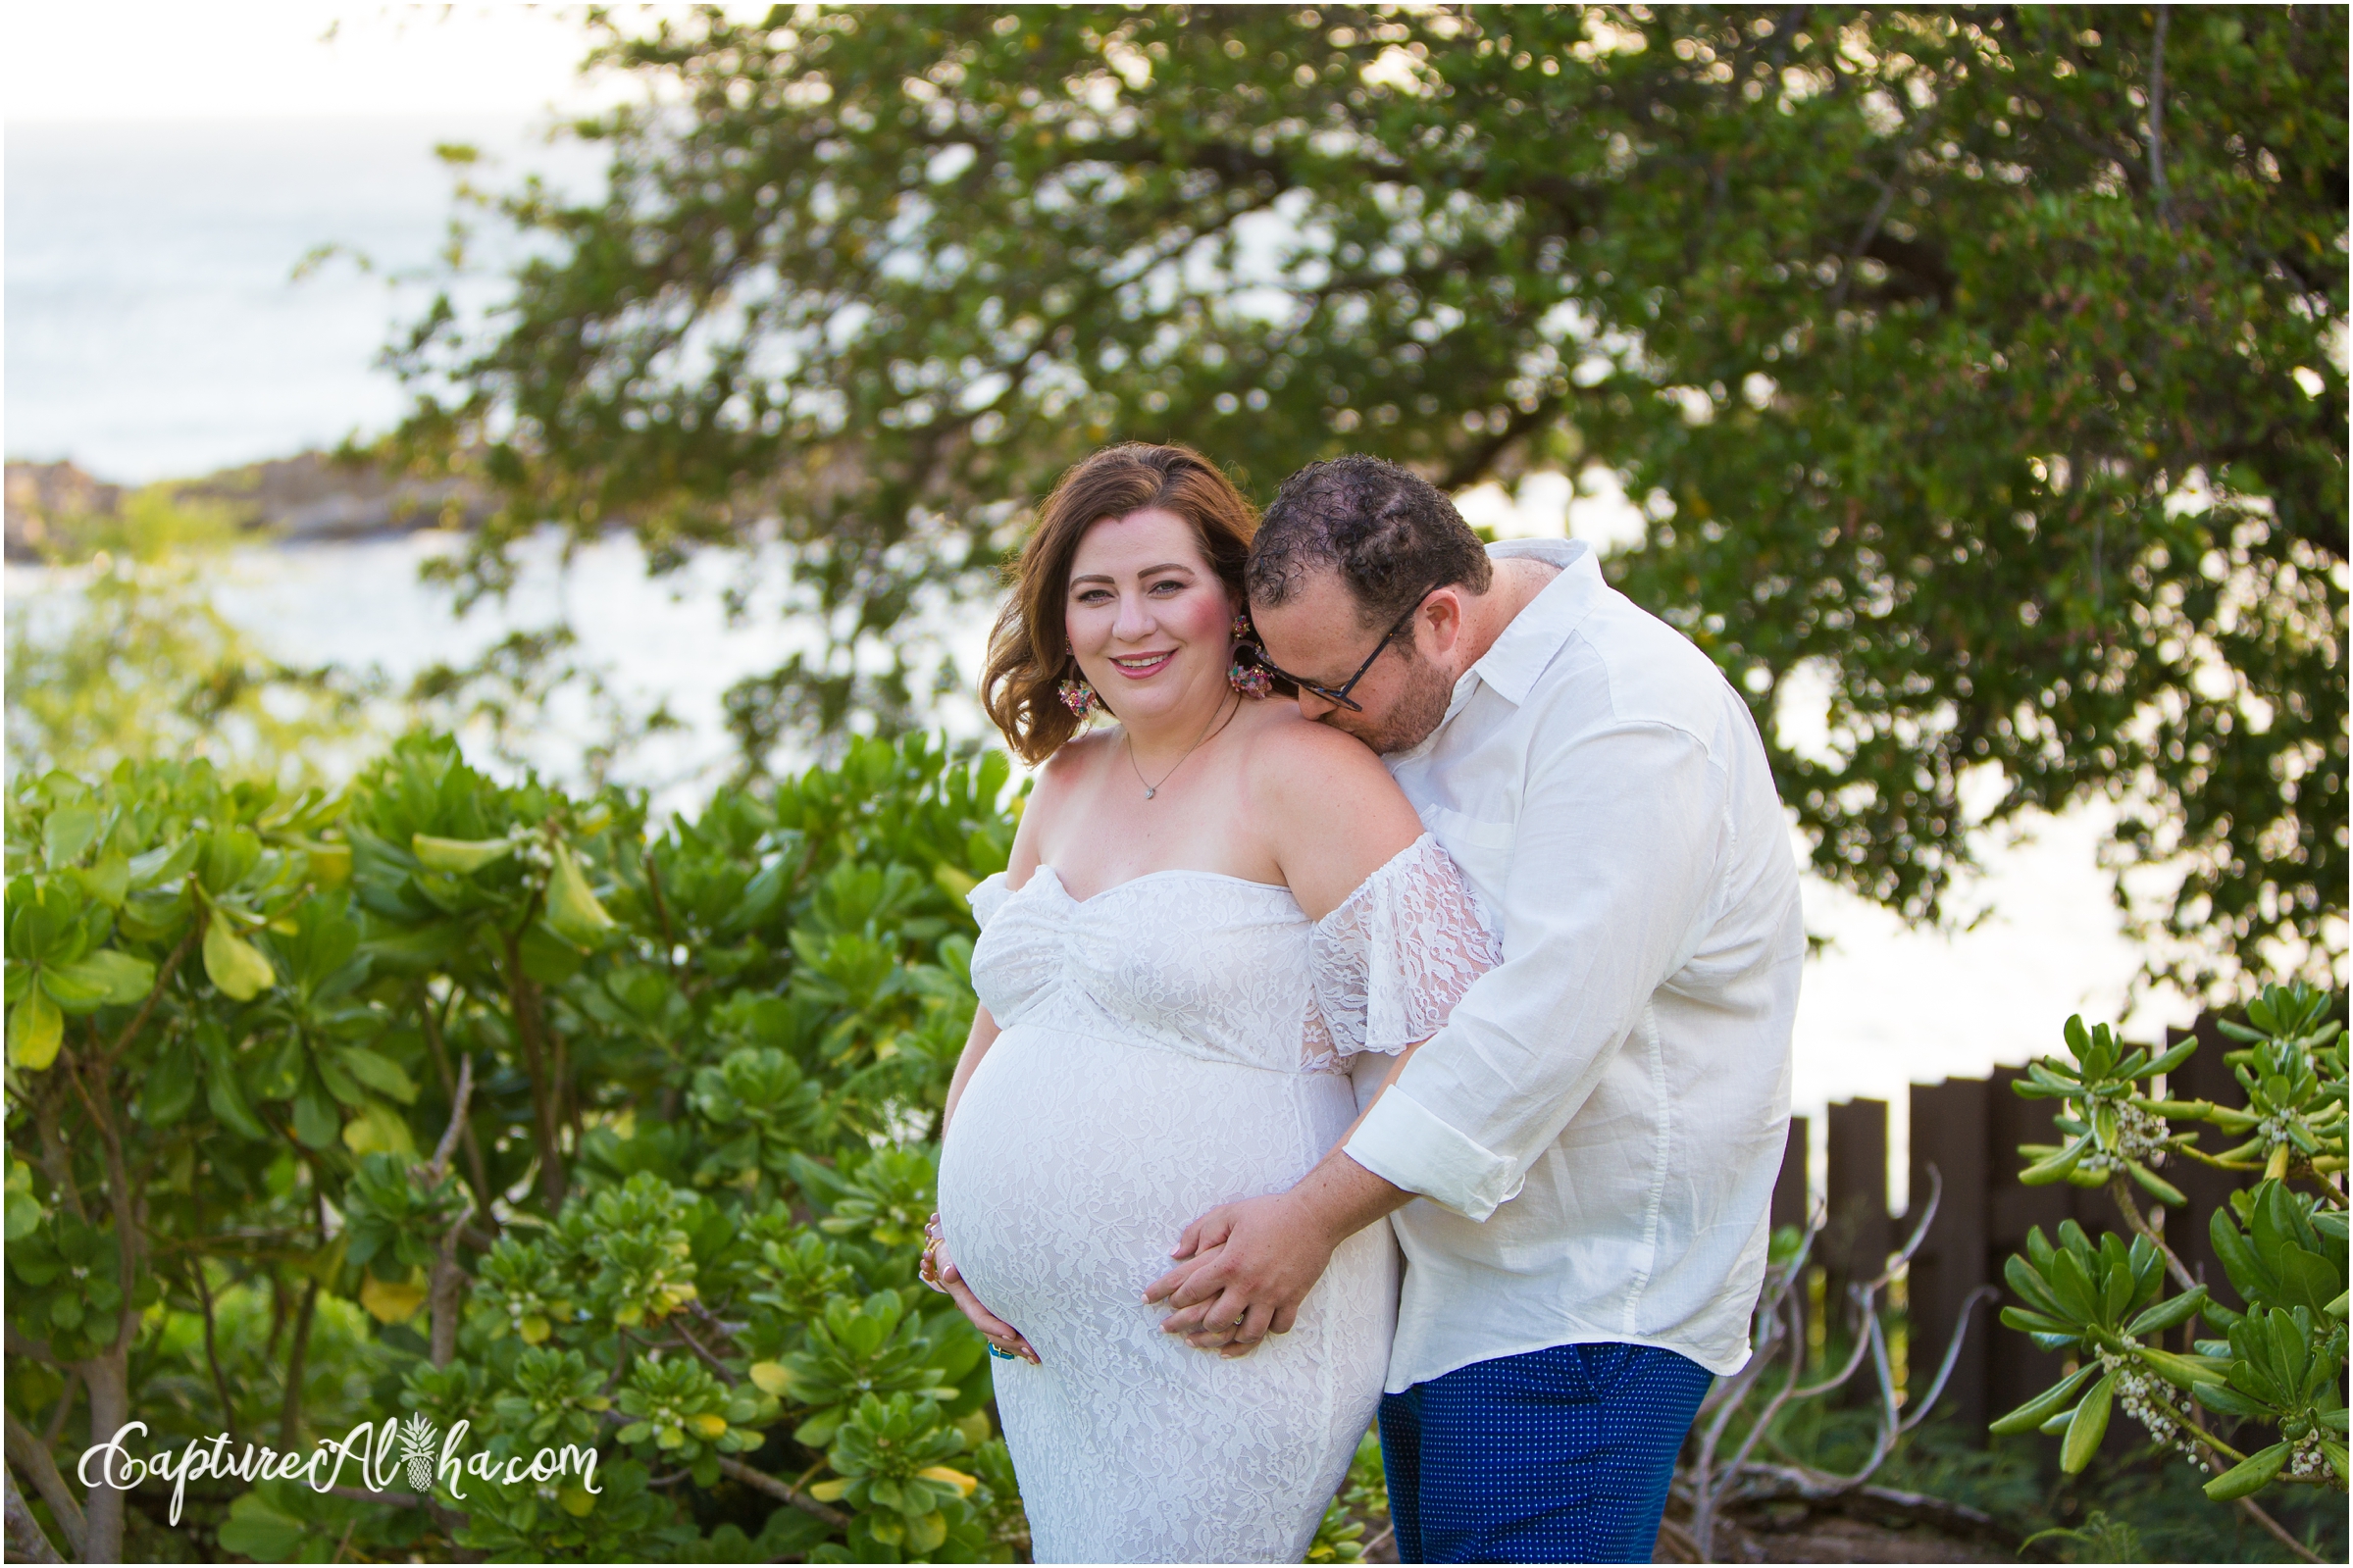 Maui Maternity Photographer at Kapalua Bay with Pregnant couple surrounded by greenery